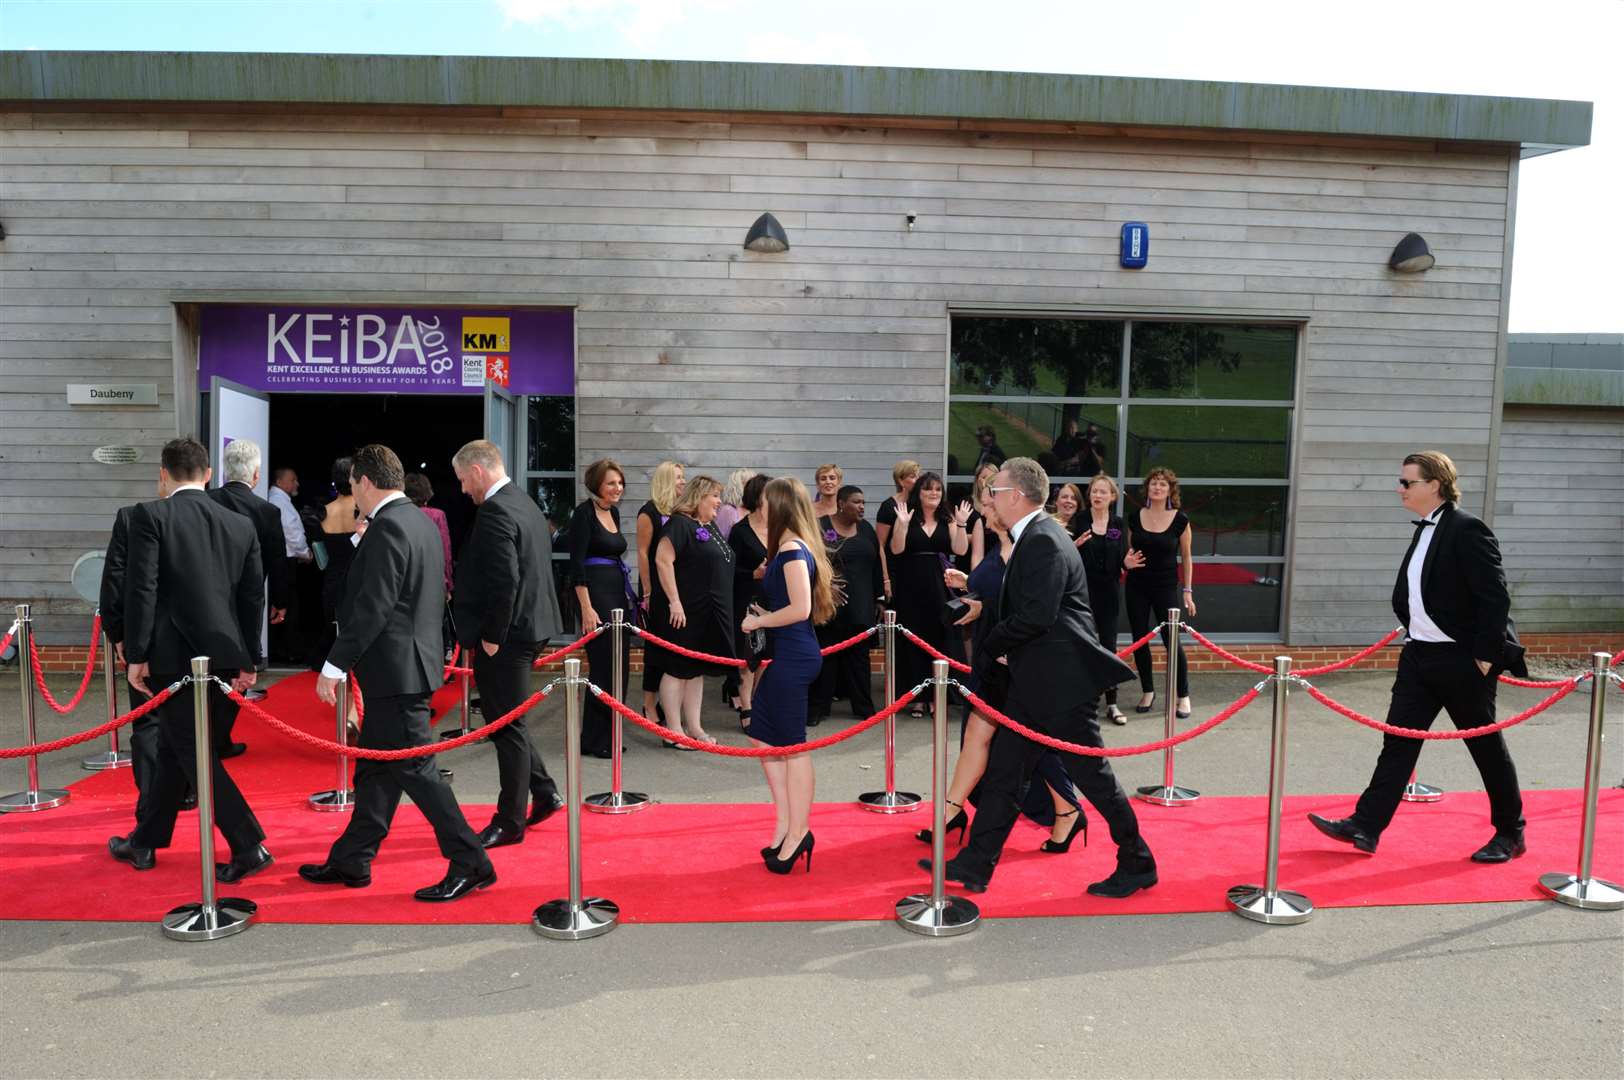 Guests arriving last year get the red carpet treatment